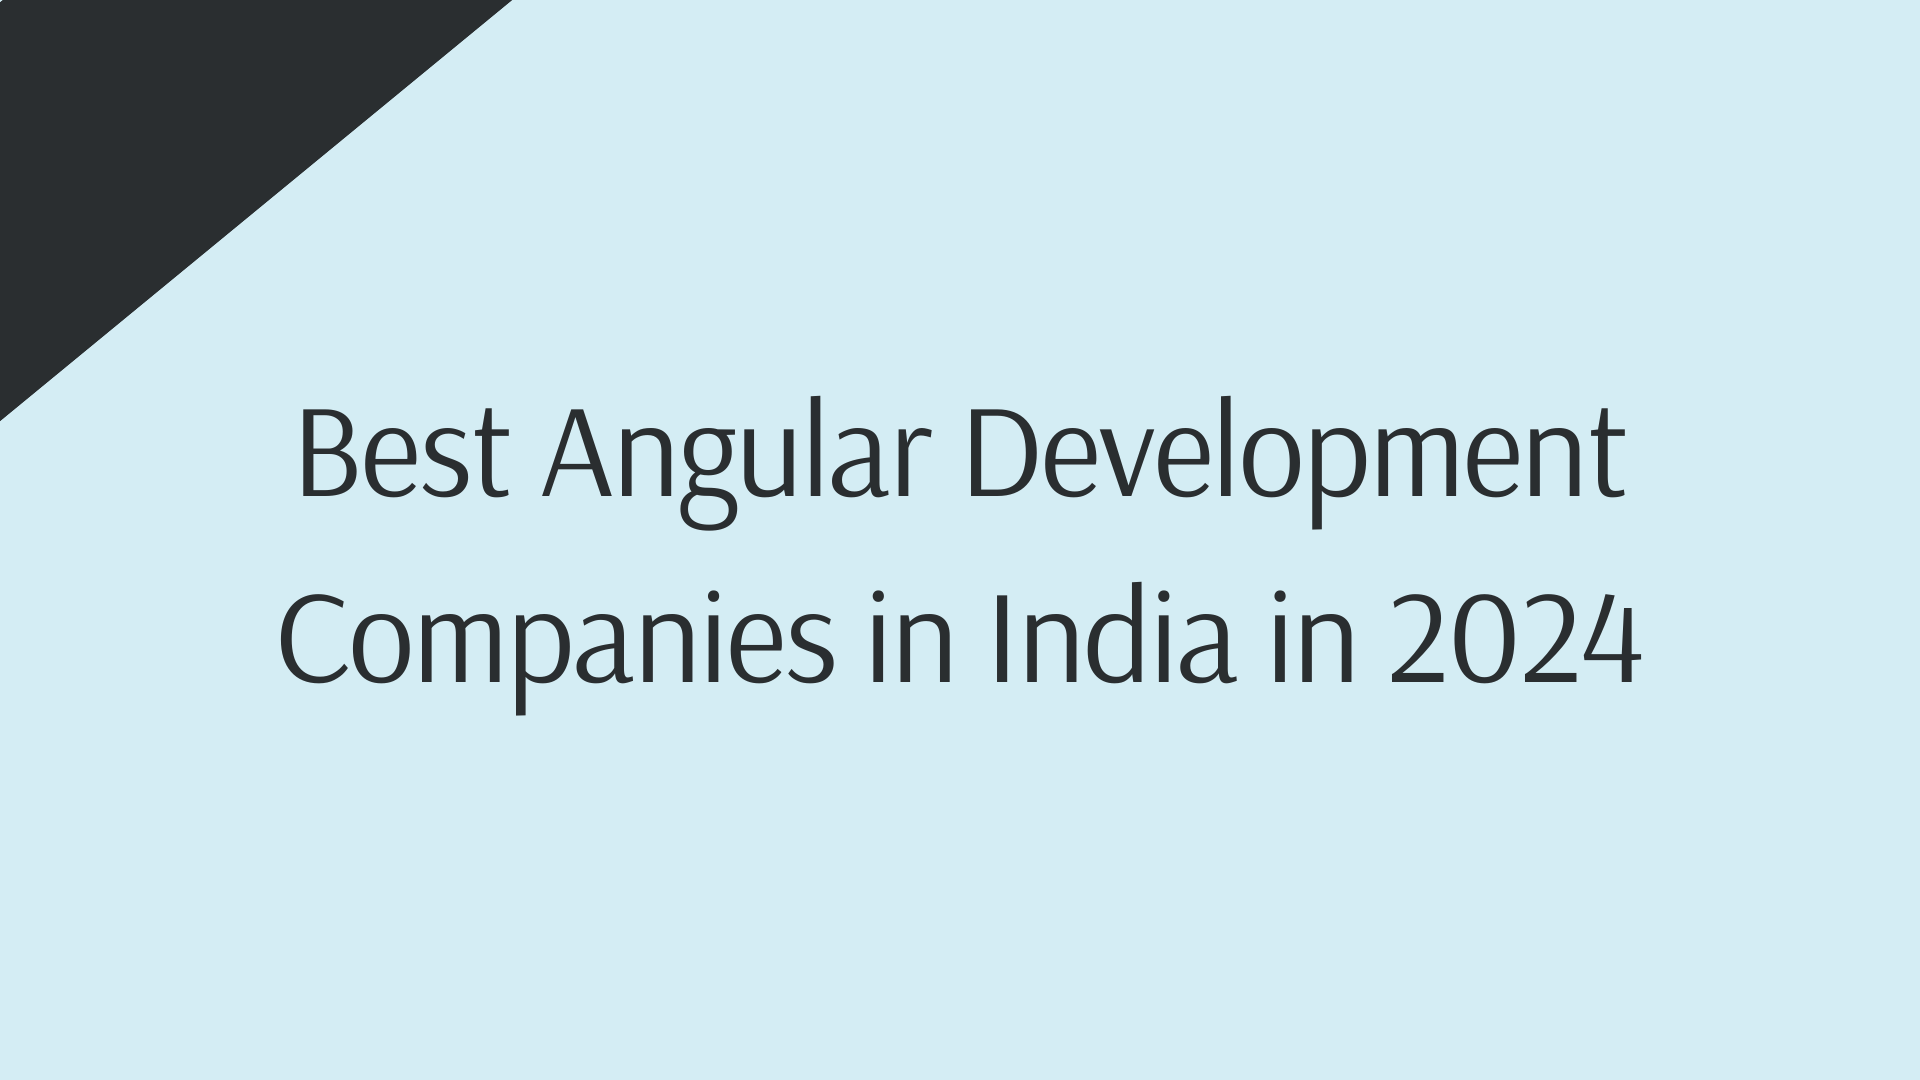 Title image for the blog on best angular development companies in India